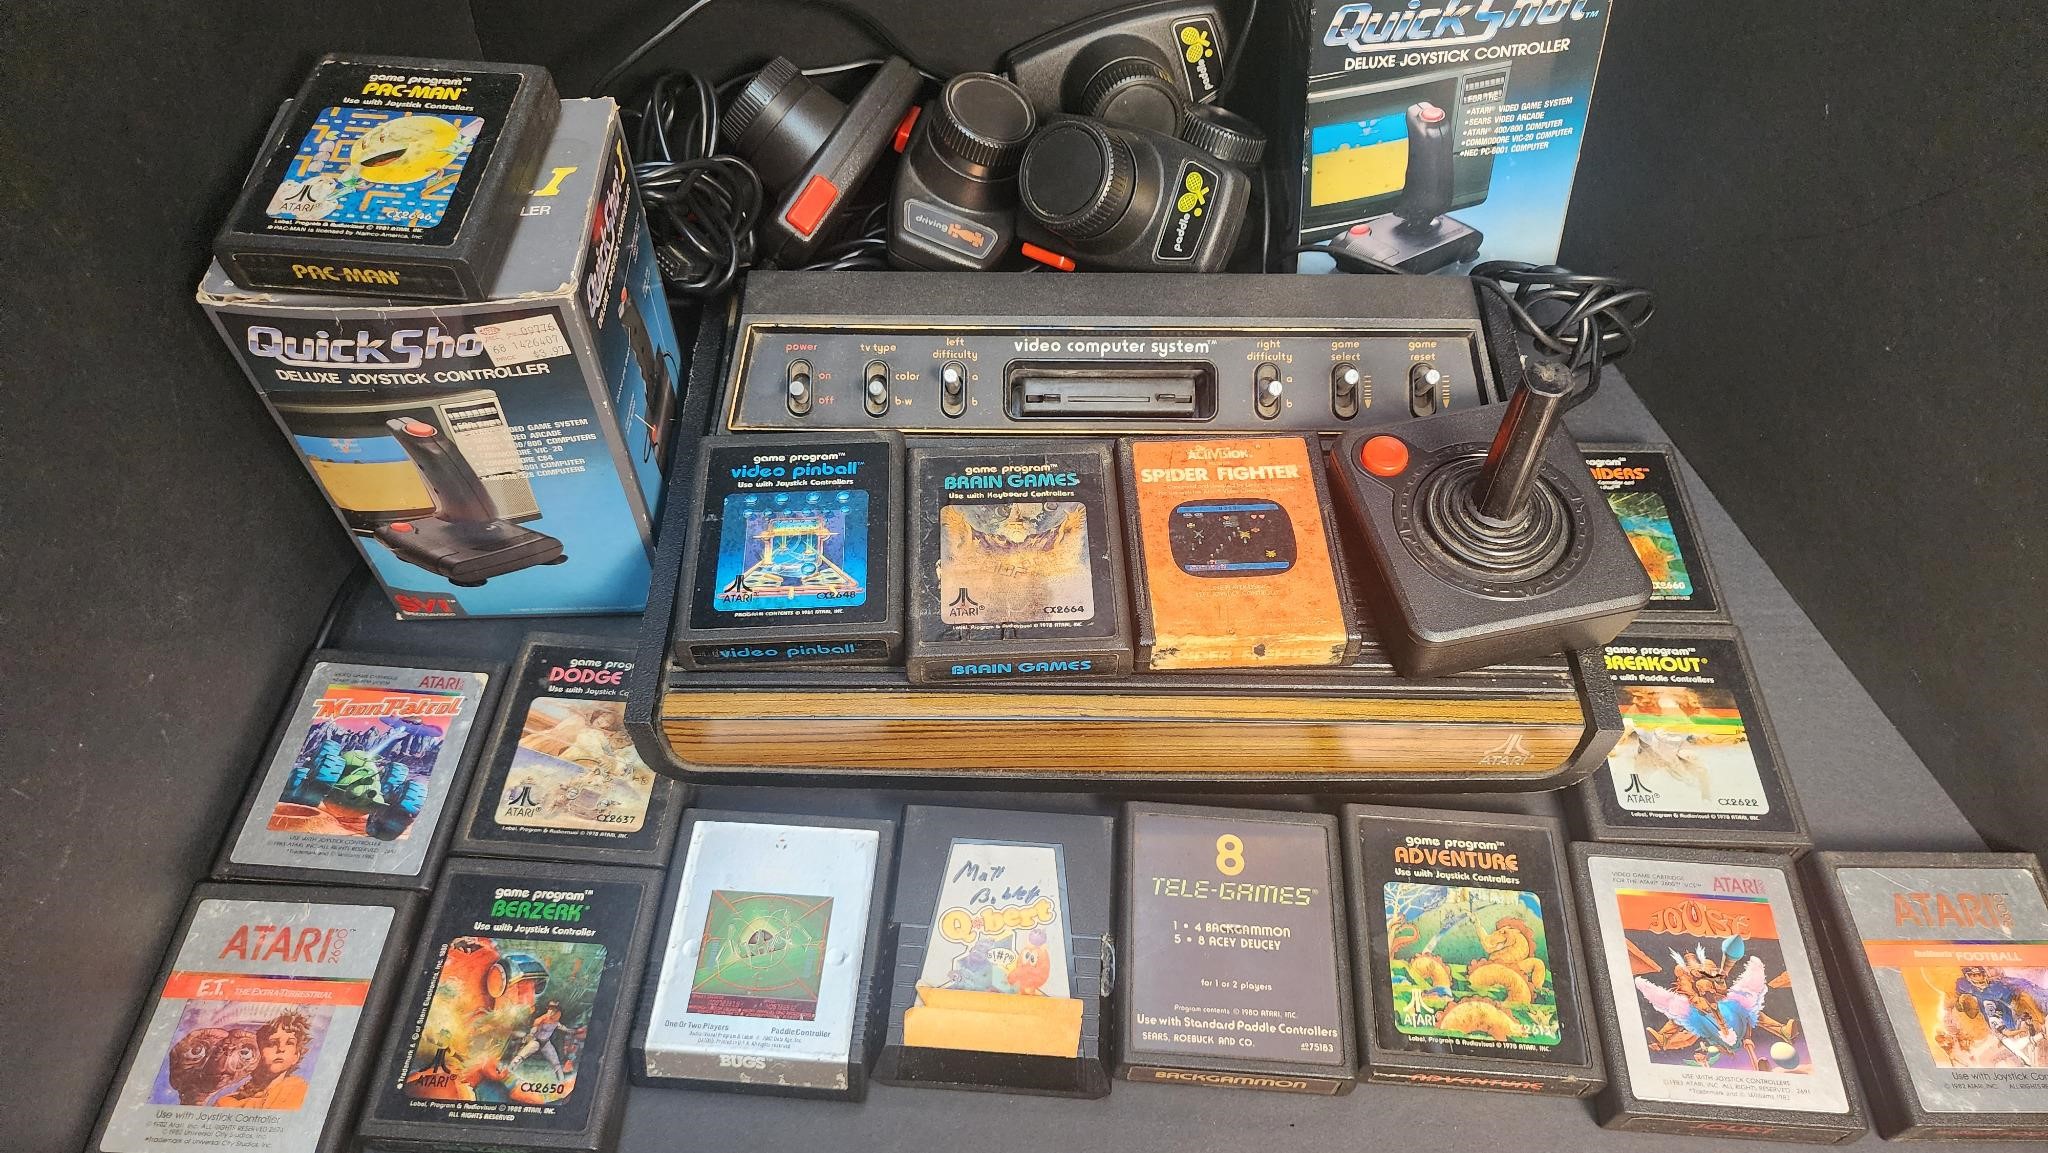 Atari 2600 with games and controllers